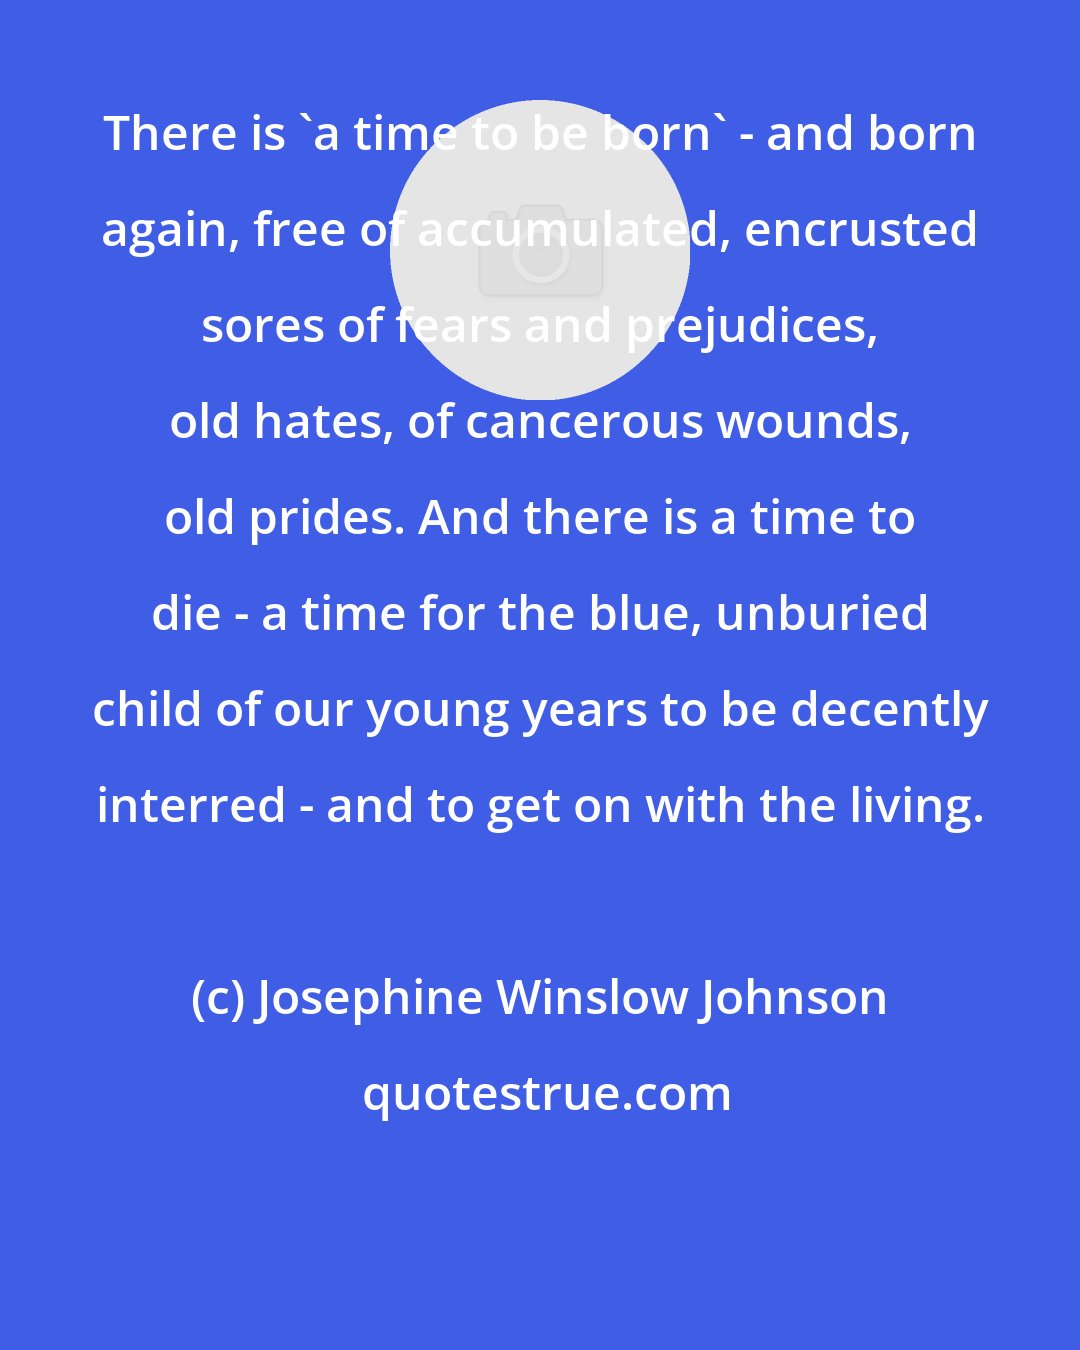 Josephine Winslow Johnson: There is 'a time to be born' - and born again, free of accumulated, encrusted sores of fears and prejudices, old hates, of cancerous wounds, old prides. And there is a time to die - a time for the blue, unburied child of our young years to be decently interred - and to get on with the living.